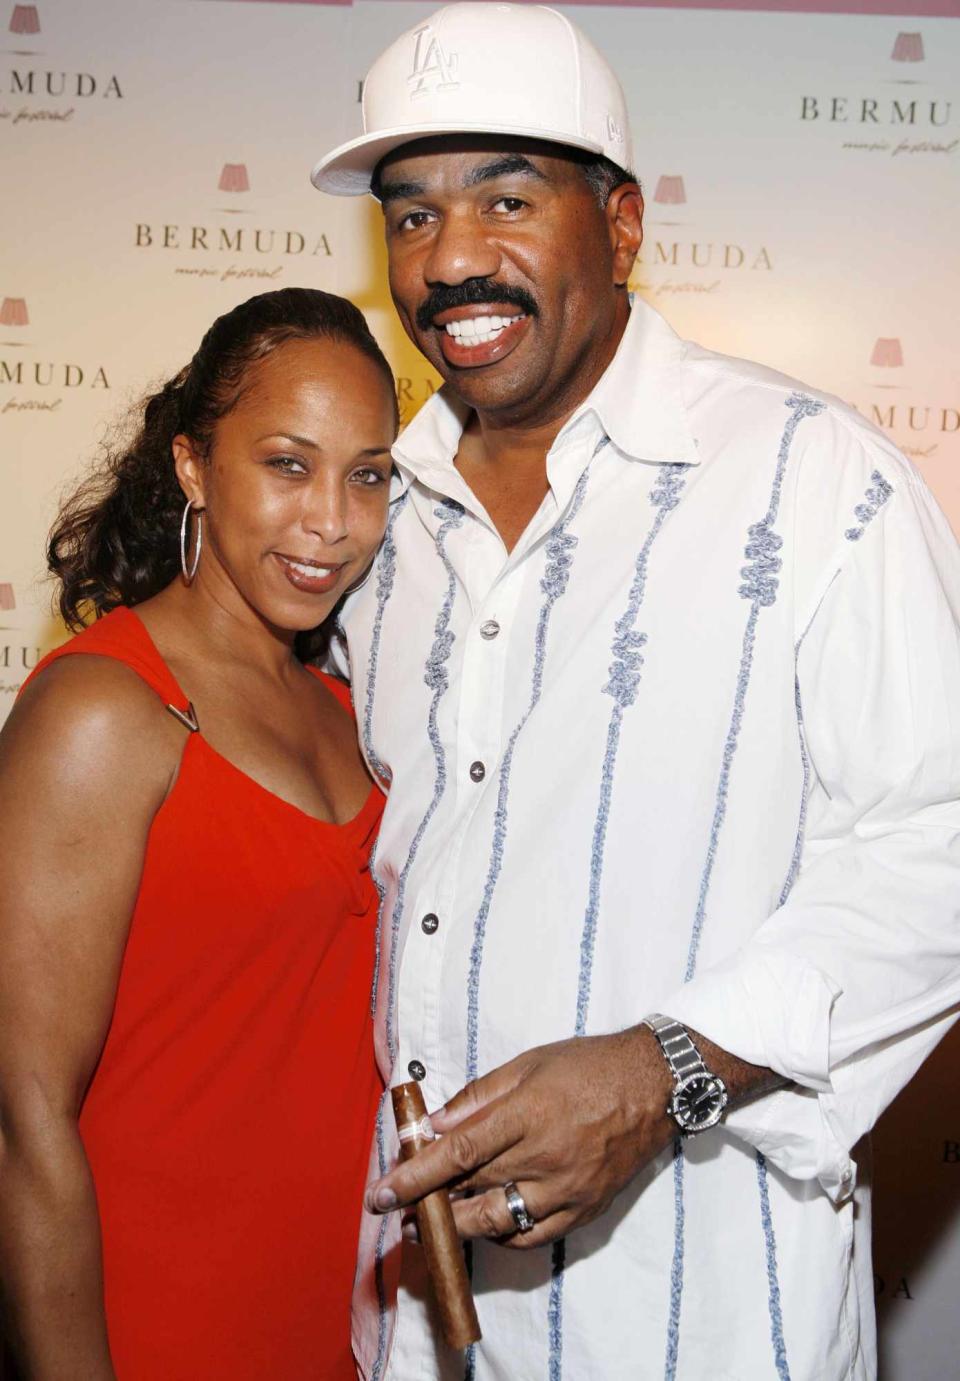 Marjorie Bridges (L) and comedian Steve Harvey (R) attend the first night of the Bermuda Music Festival at Southampton Beach Club on October 3, 2007 in Southampton, Bermuda